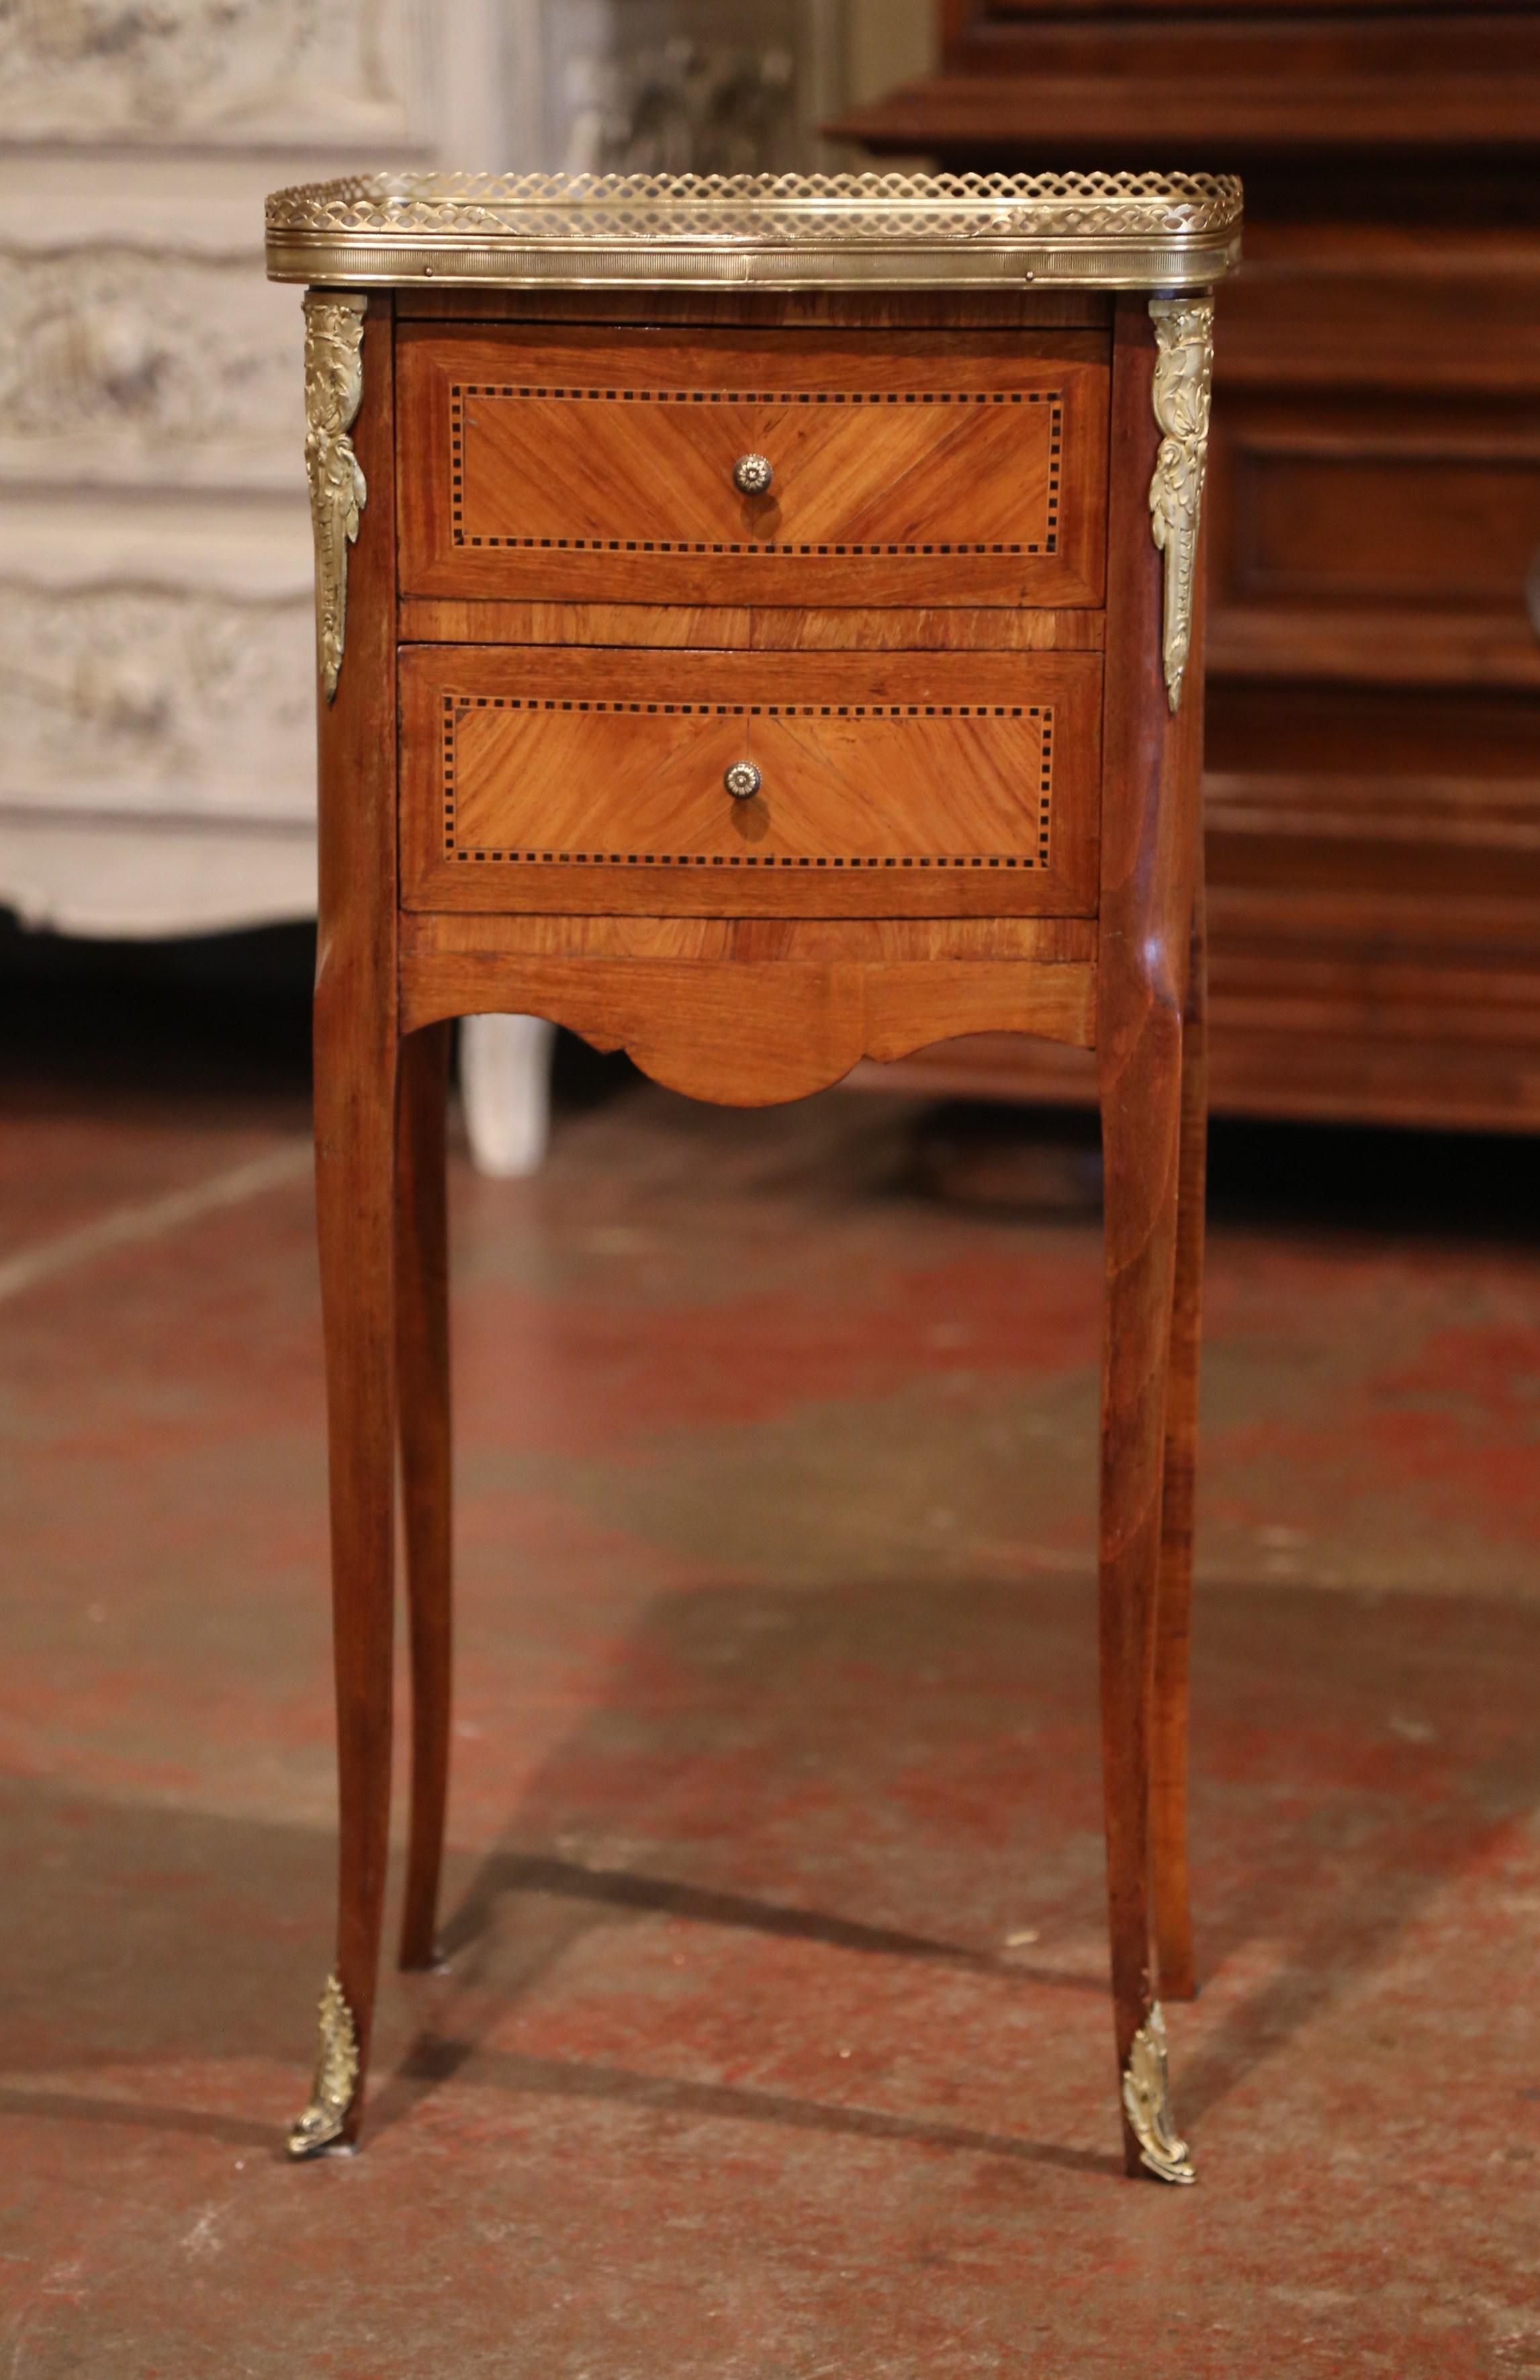 Crafted in France circa 1890, this elegant antique chest sits on cabriole legs decorated with bronze caps feet over a scalloped apron. The petite Louis XV style commode features two drawers across the front decorated with marquetry inlay work and